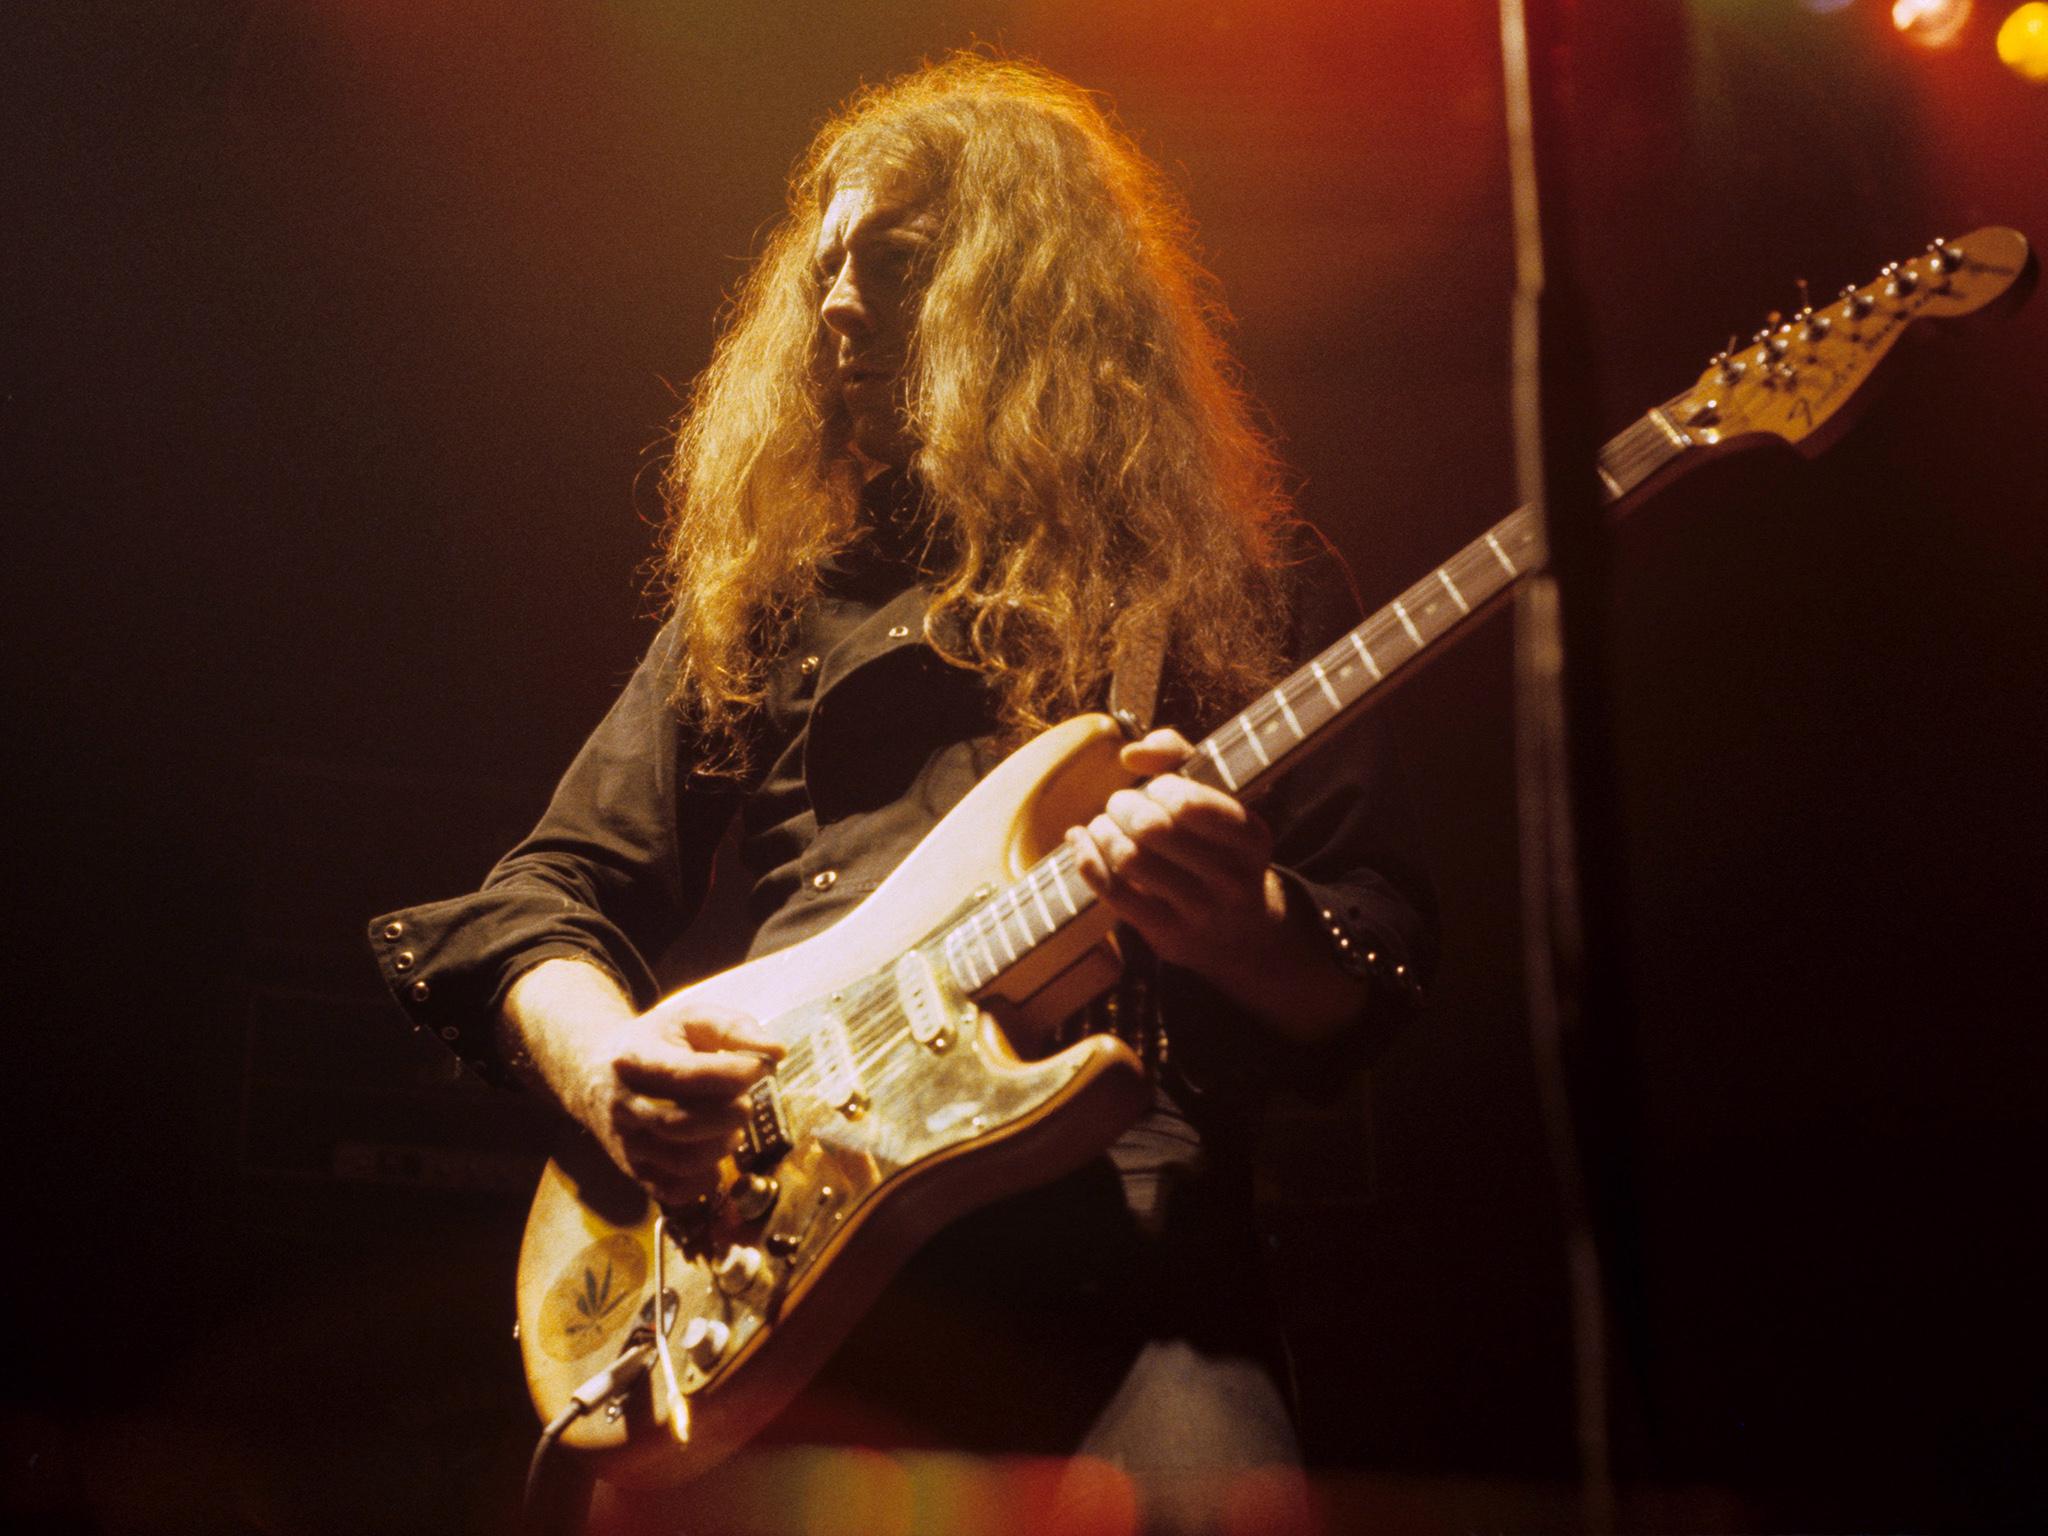 Clarke played on Motorhead’s self-titled 1977 debut album and also played on 1979’s ‘Overkill’ and ‘Bomber’, 1980’s ‘Ace Of Spades’ and 1982’s ‘Iron Fist’